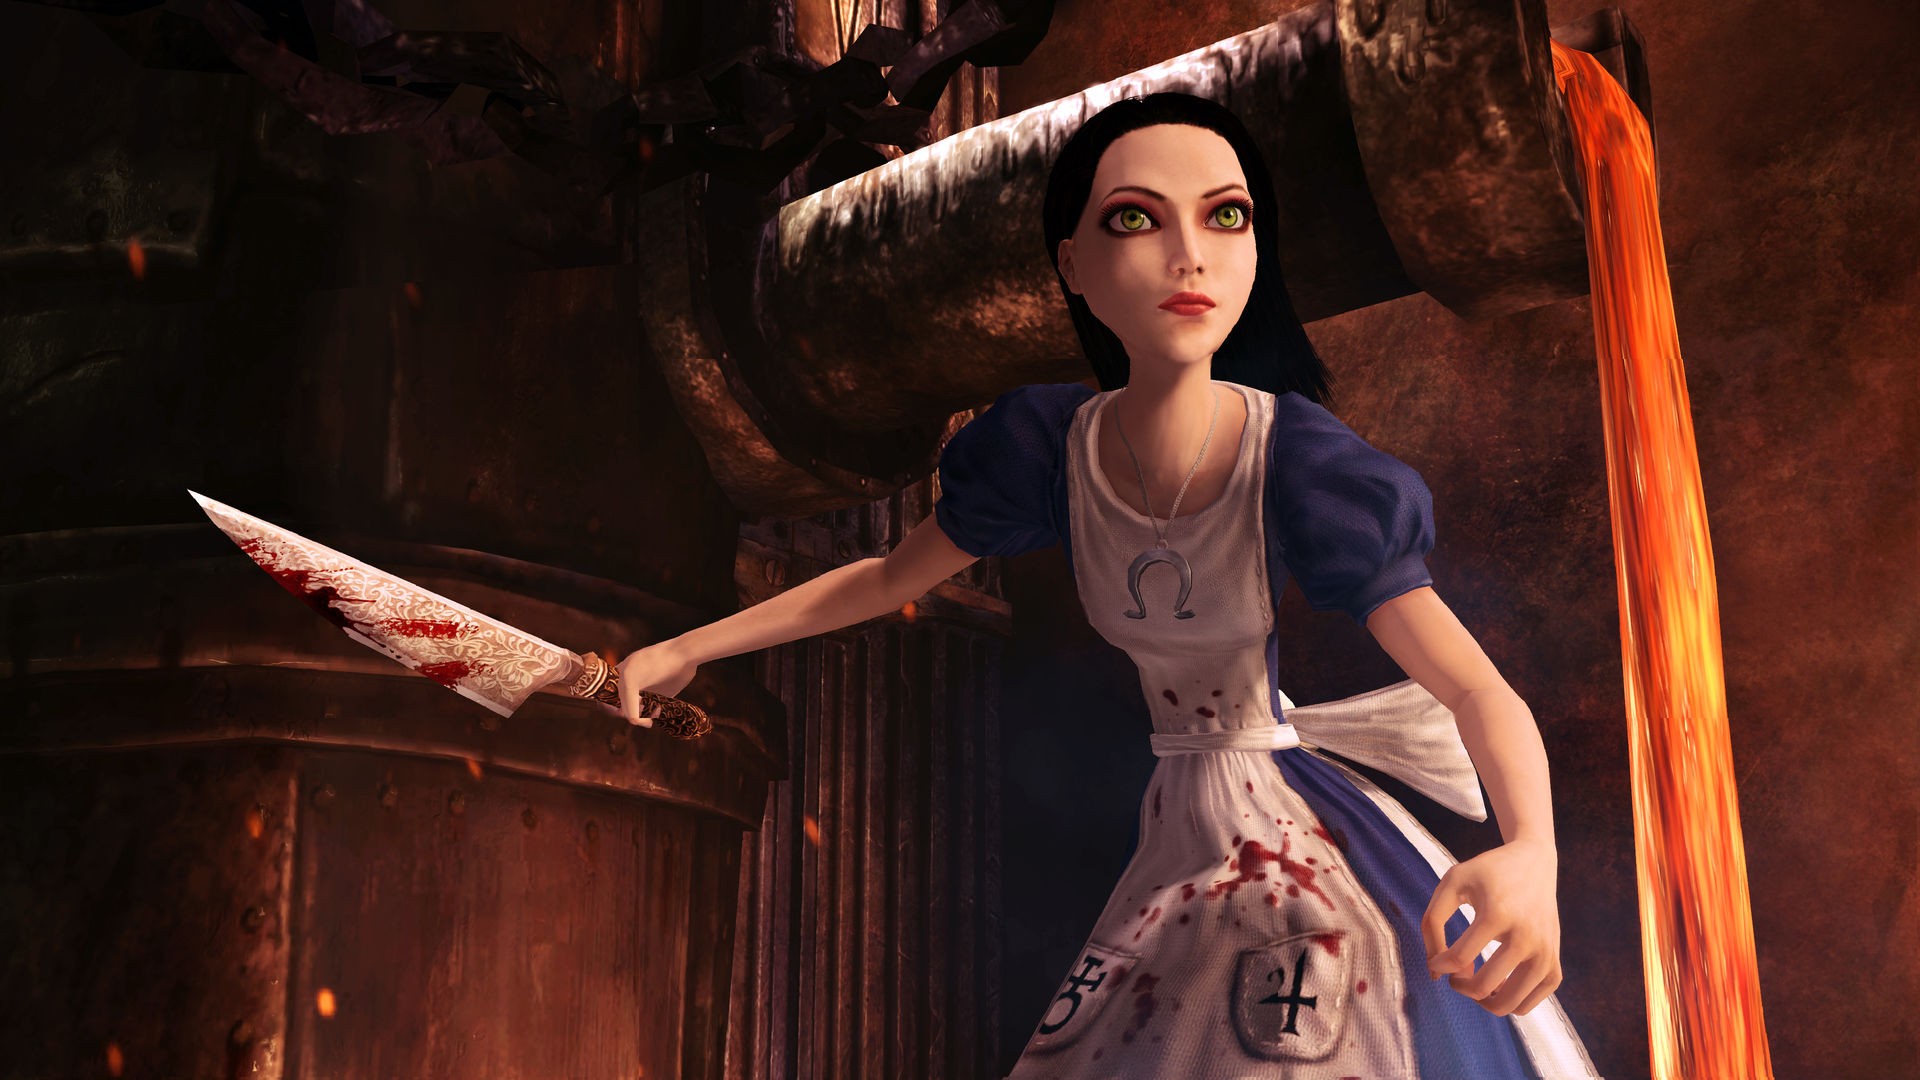 American McGee's Alice Articles - Geek, Anime and RPG news